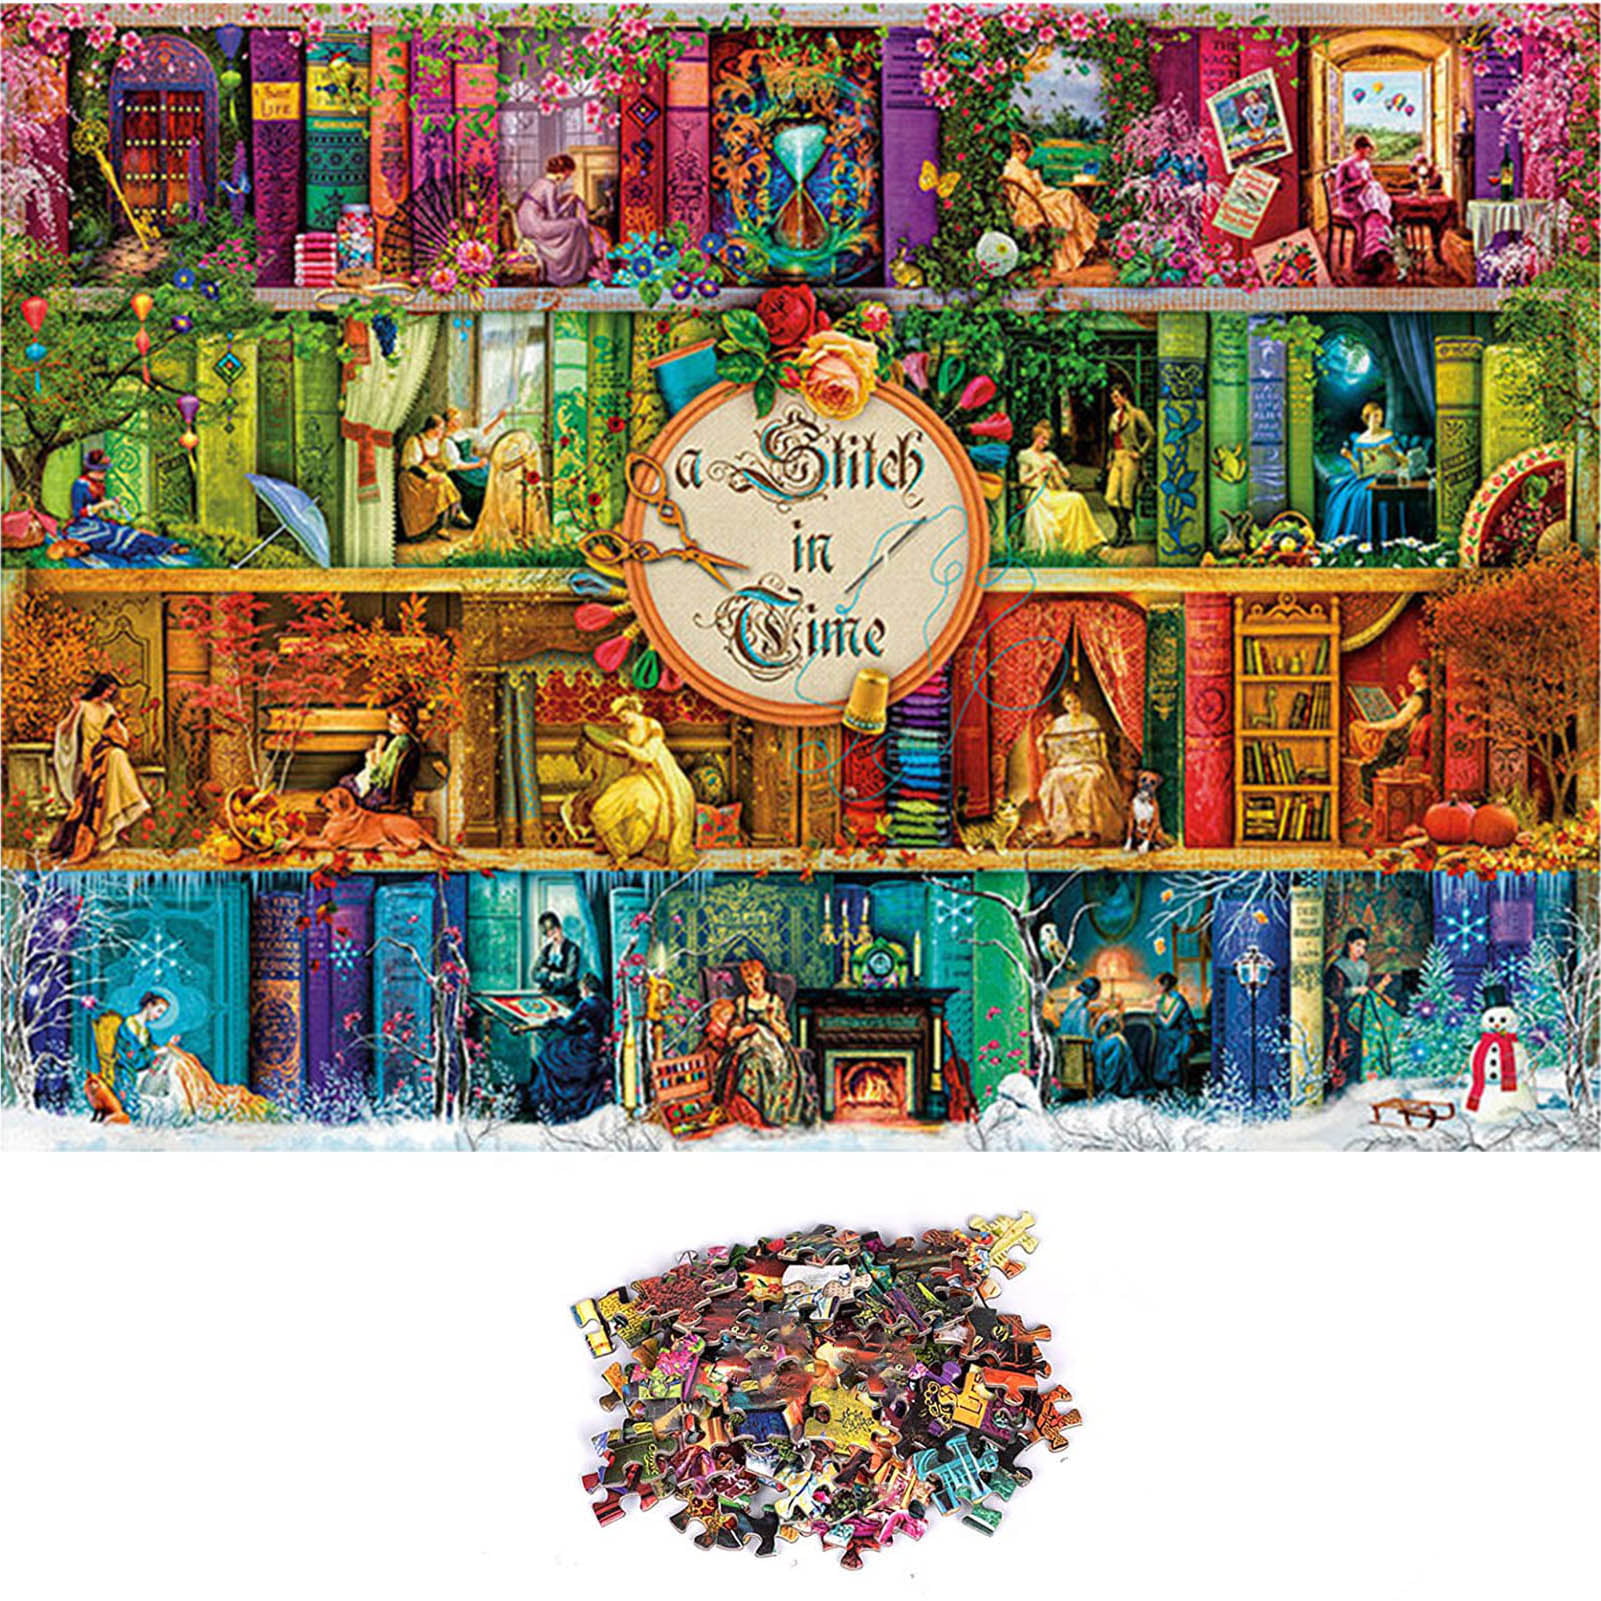 Jigsaw Puzzles for Adults Challenge Puzzle Gift Jigsaw Puzzles 4000 Pieces for Adults Lighthouse